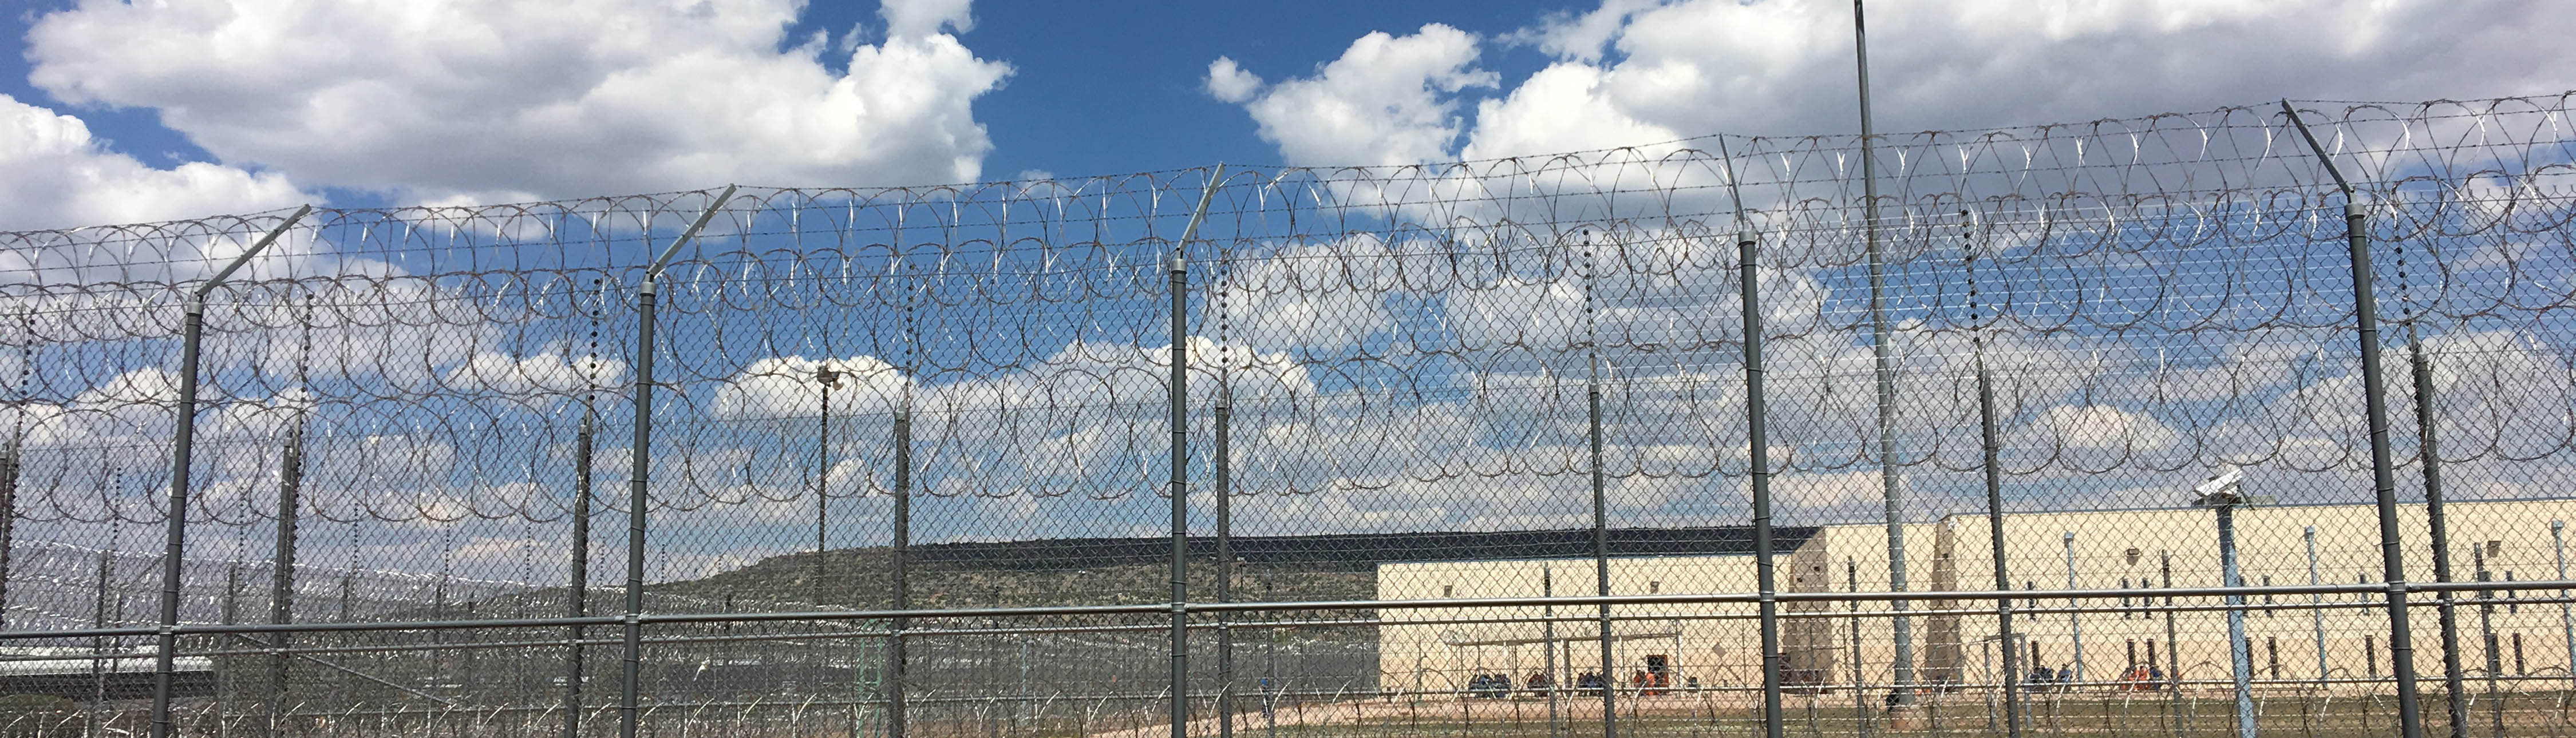 Prison in the distance behind a long barbed wire fence